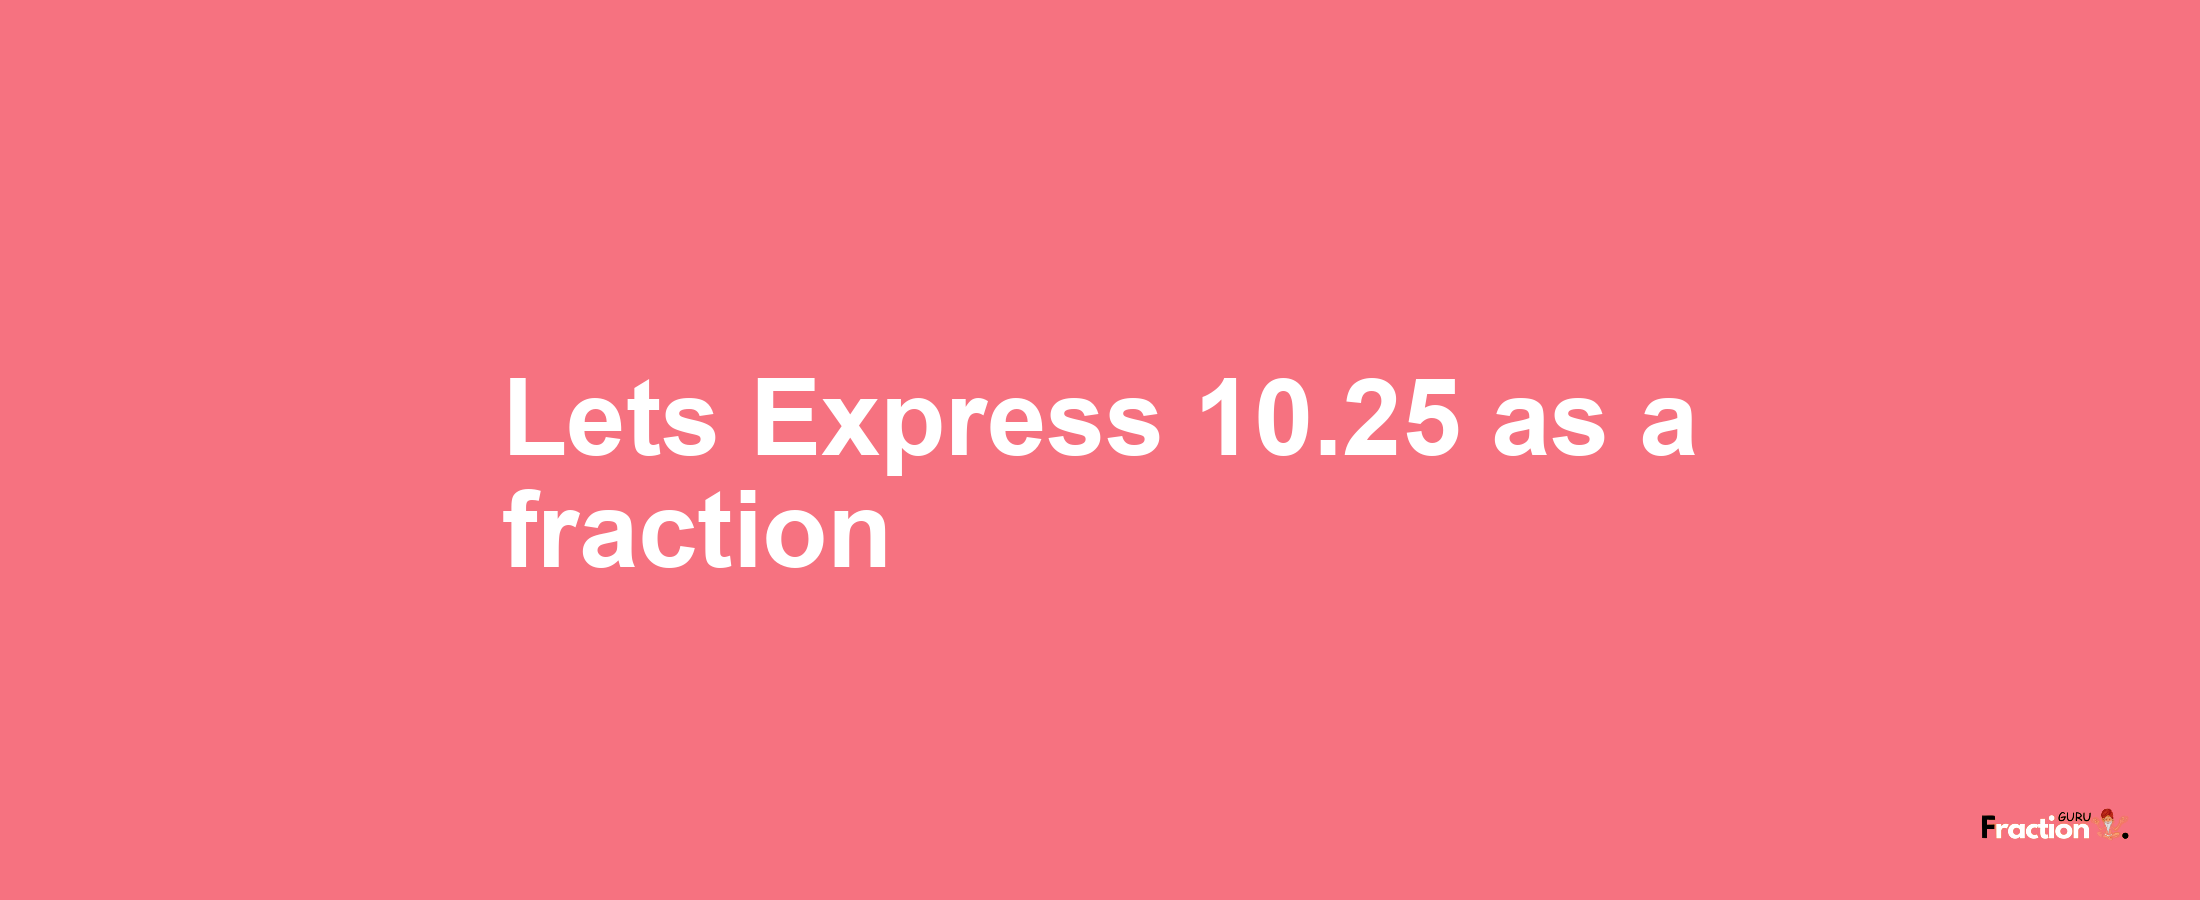 Lets Express 10.25 as afraction